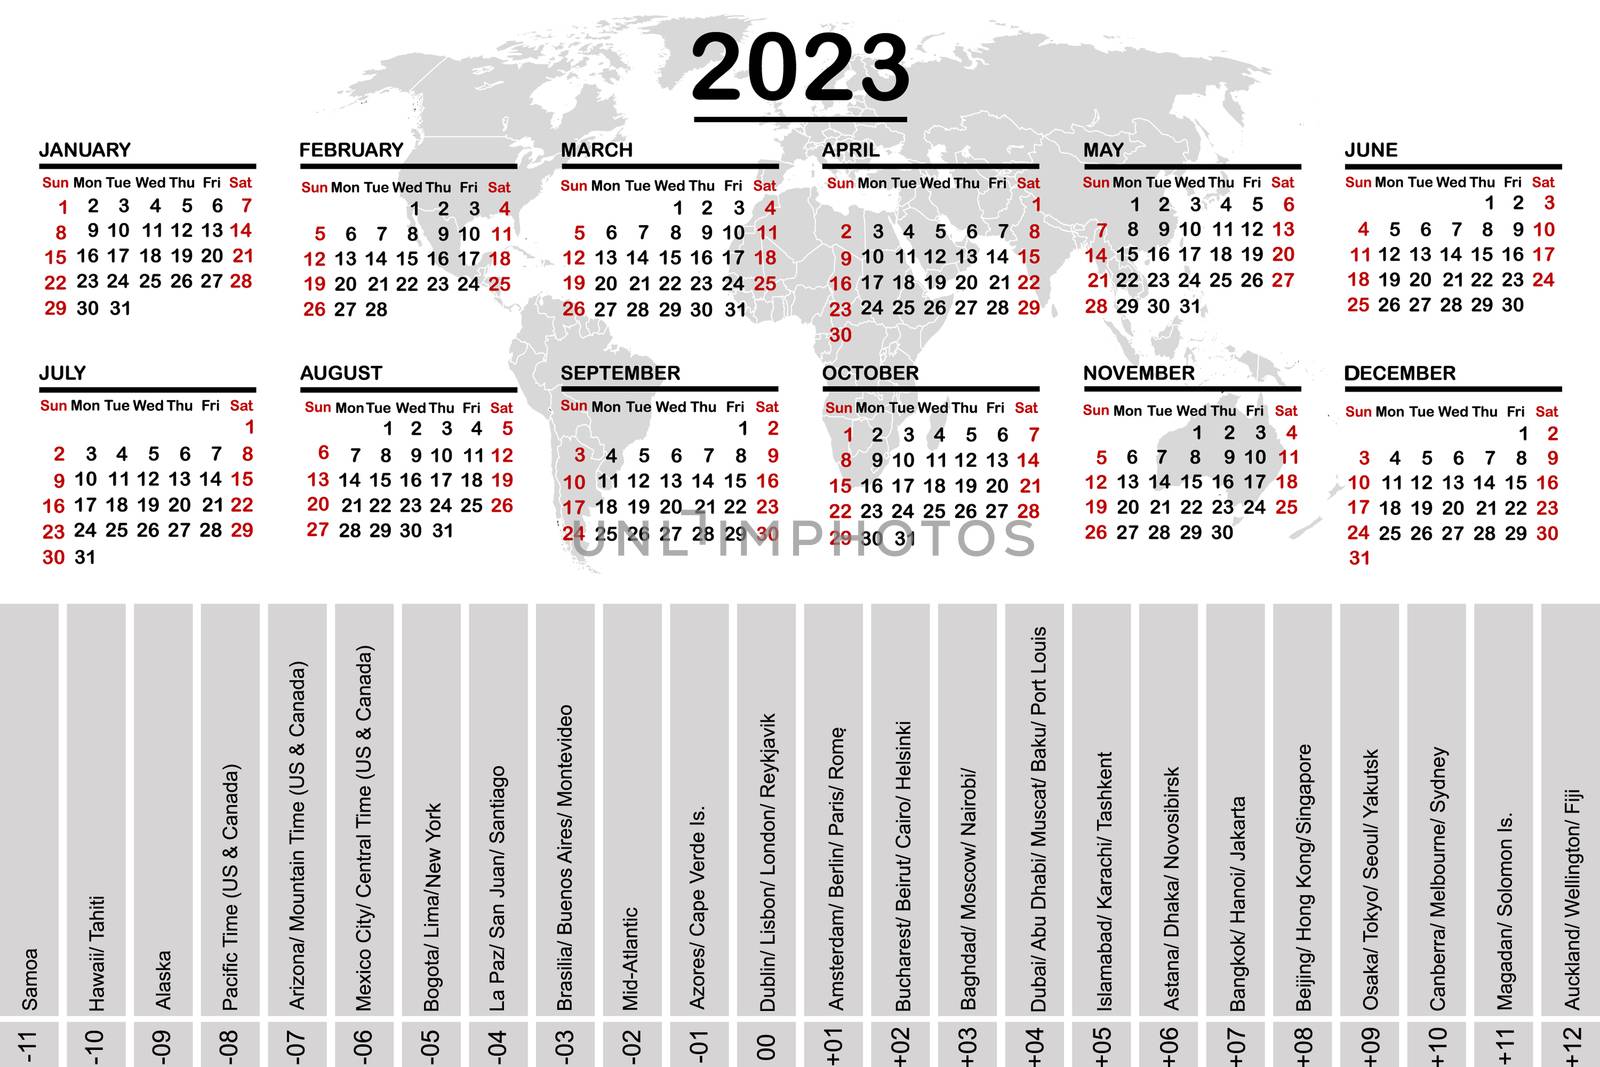 2023 calendar with world map and time zones by hibrida13